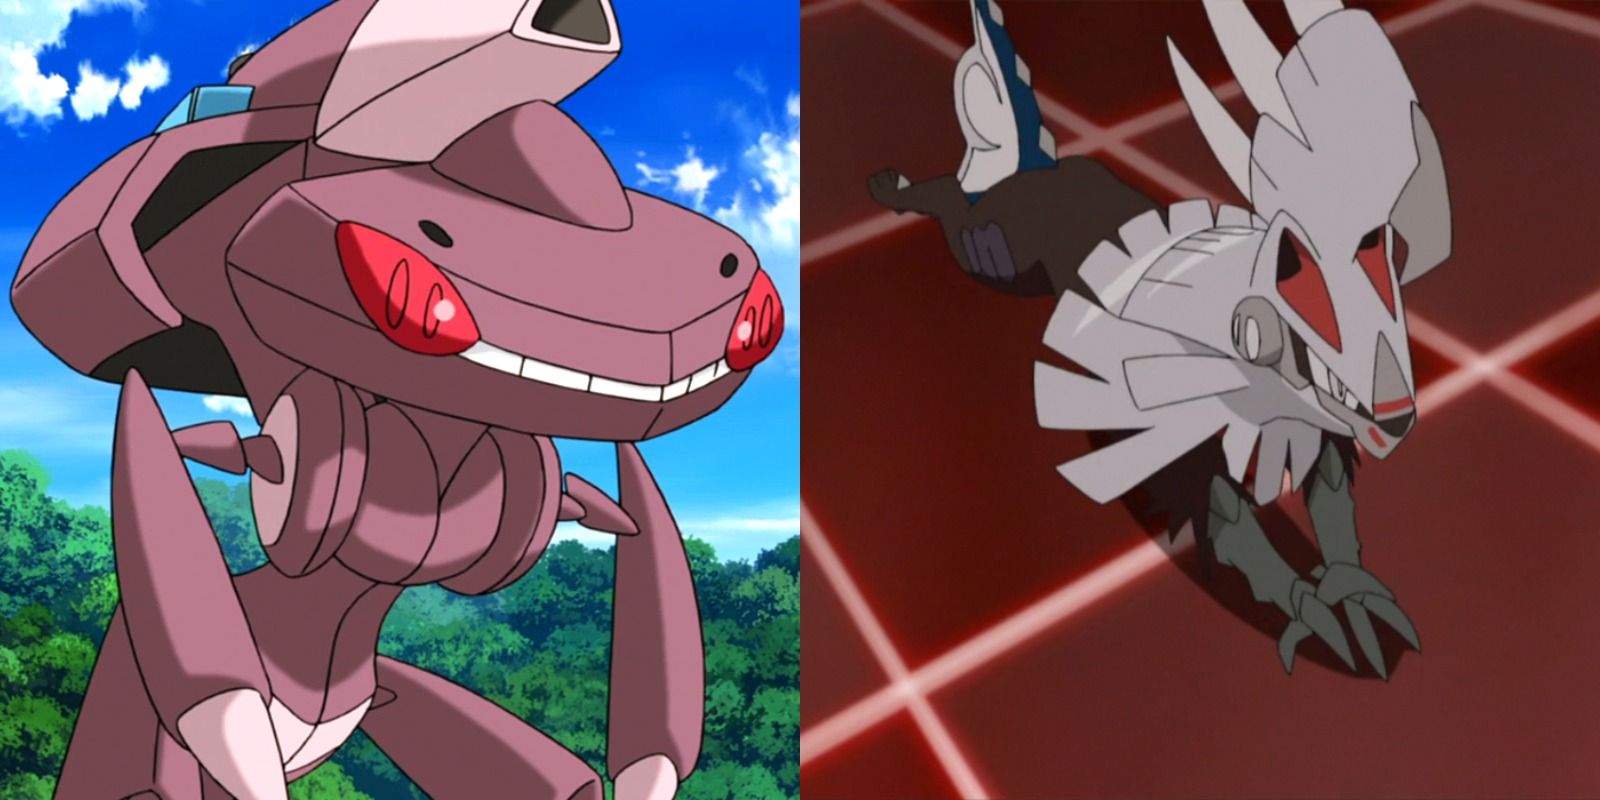 Split image of Genesect and Silvally from Pokemon